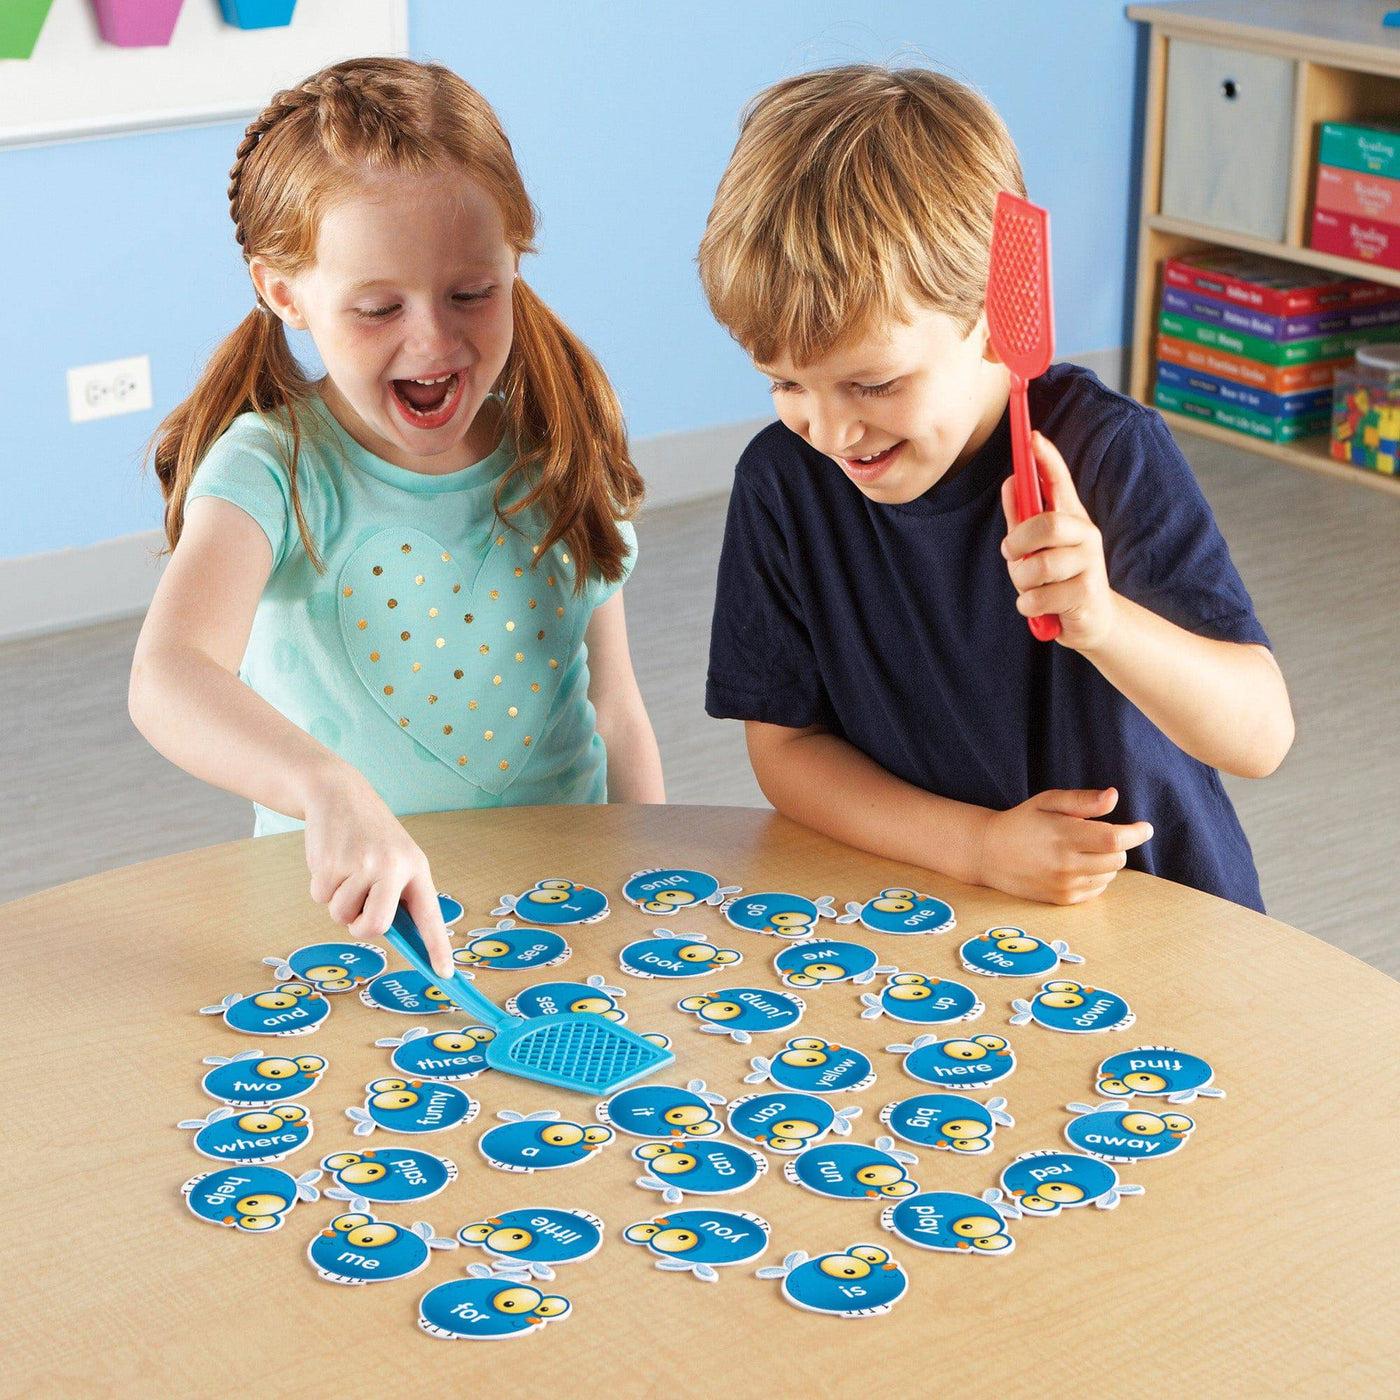 SIGHT WORDS SWAT!® A Sight Words Game - Educational Game 5 Years & Up - Discovery Toys